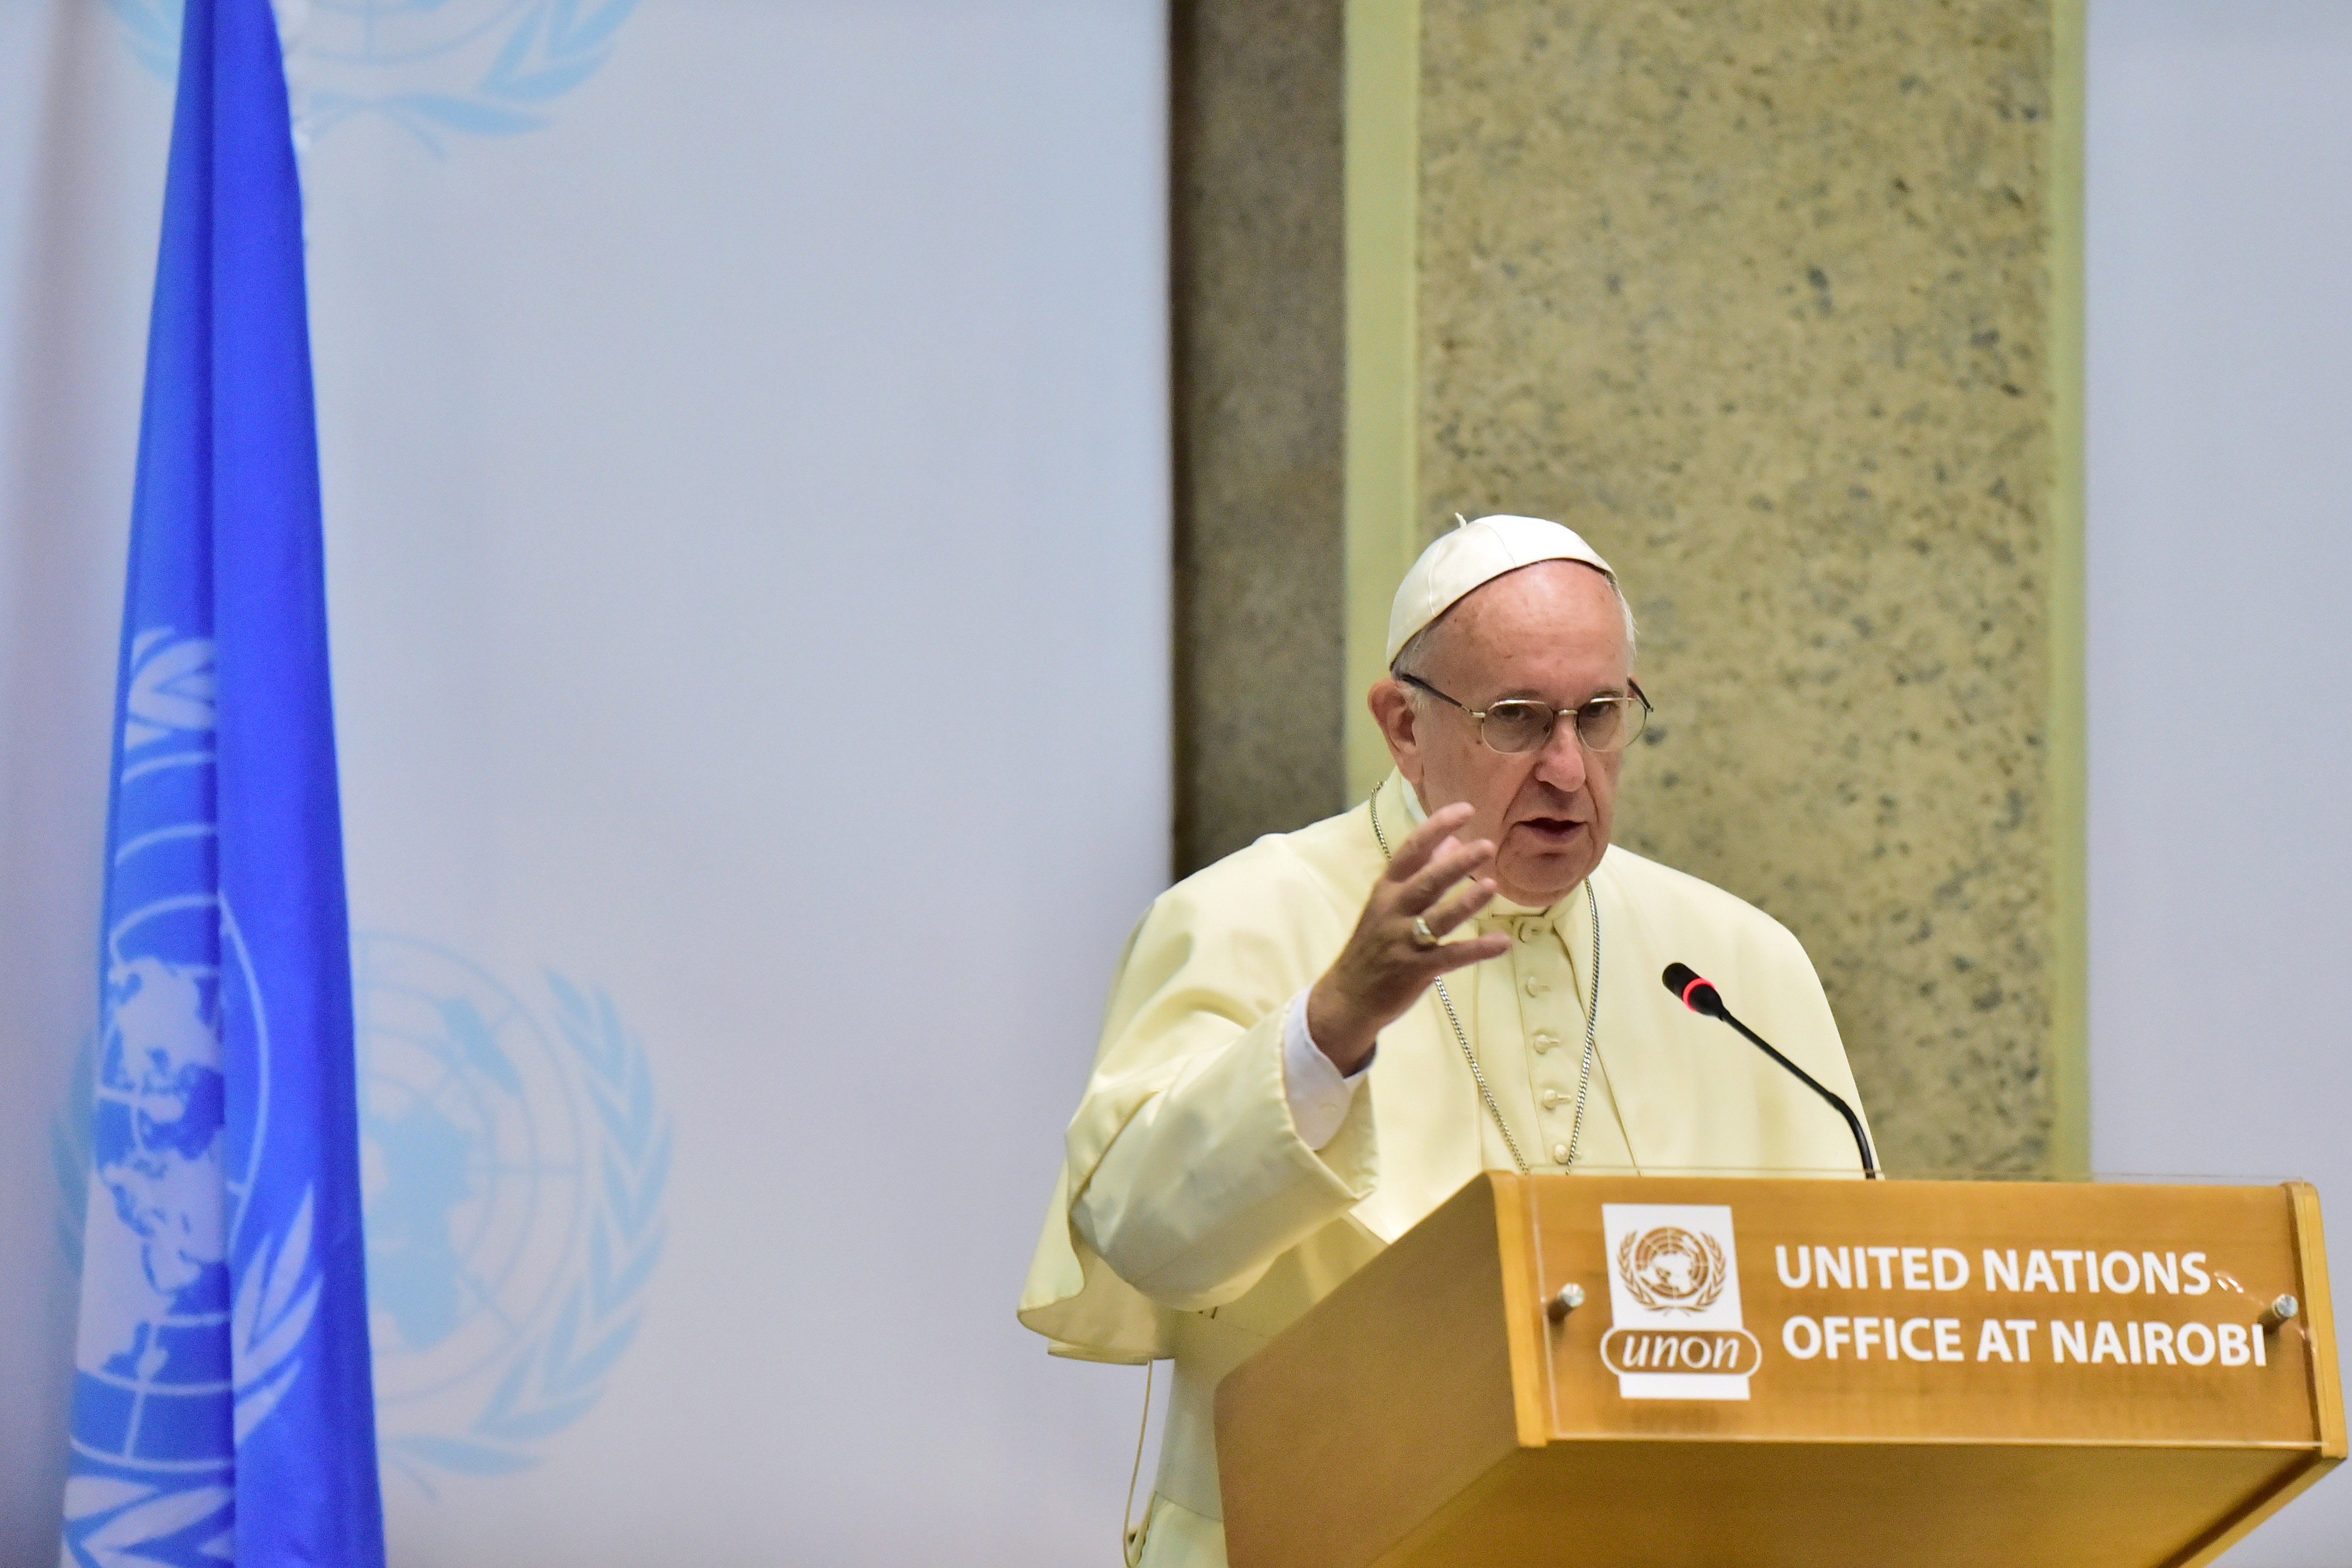 Pope Francis delivers a speech at the United Nations office in Nairobi on Nov. 26, 2015. (Giuseppe Cacace—AFP/Getty Images)